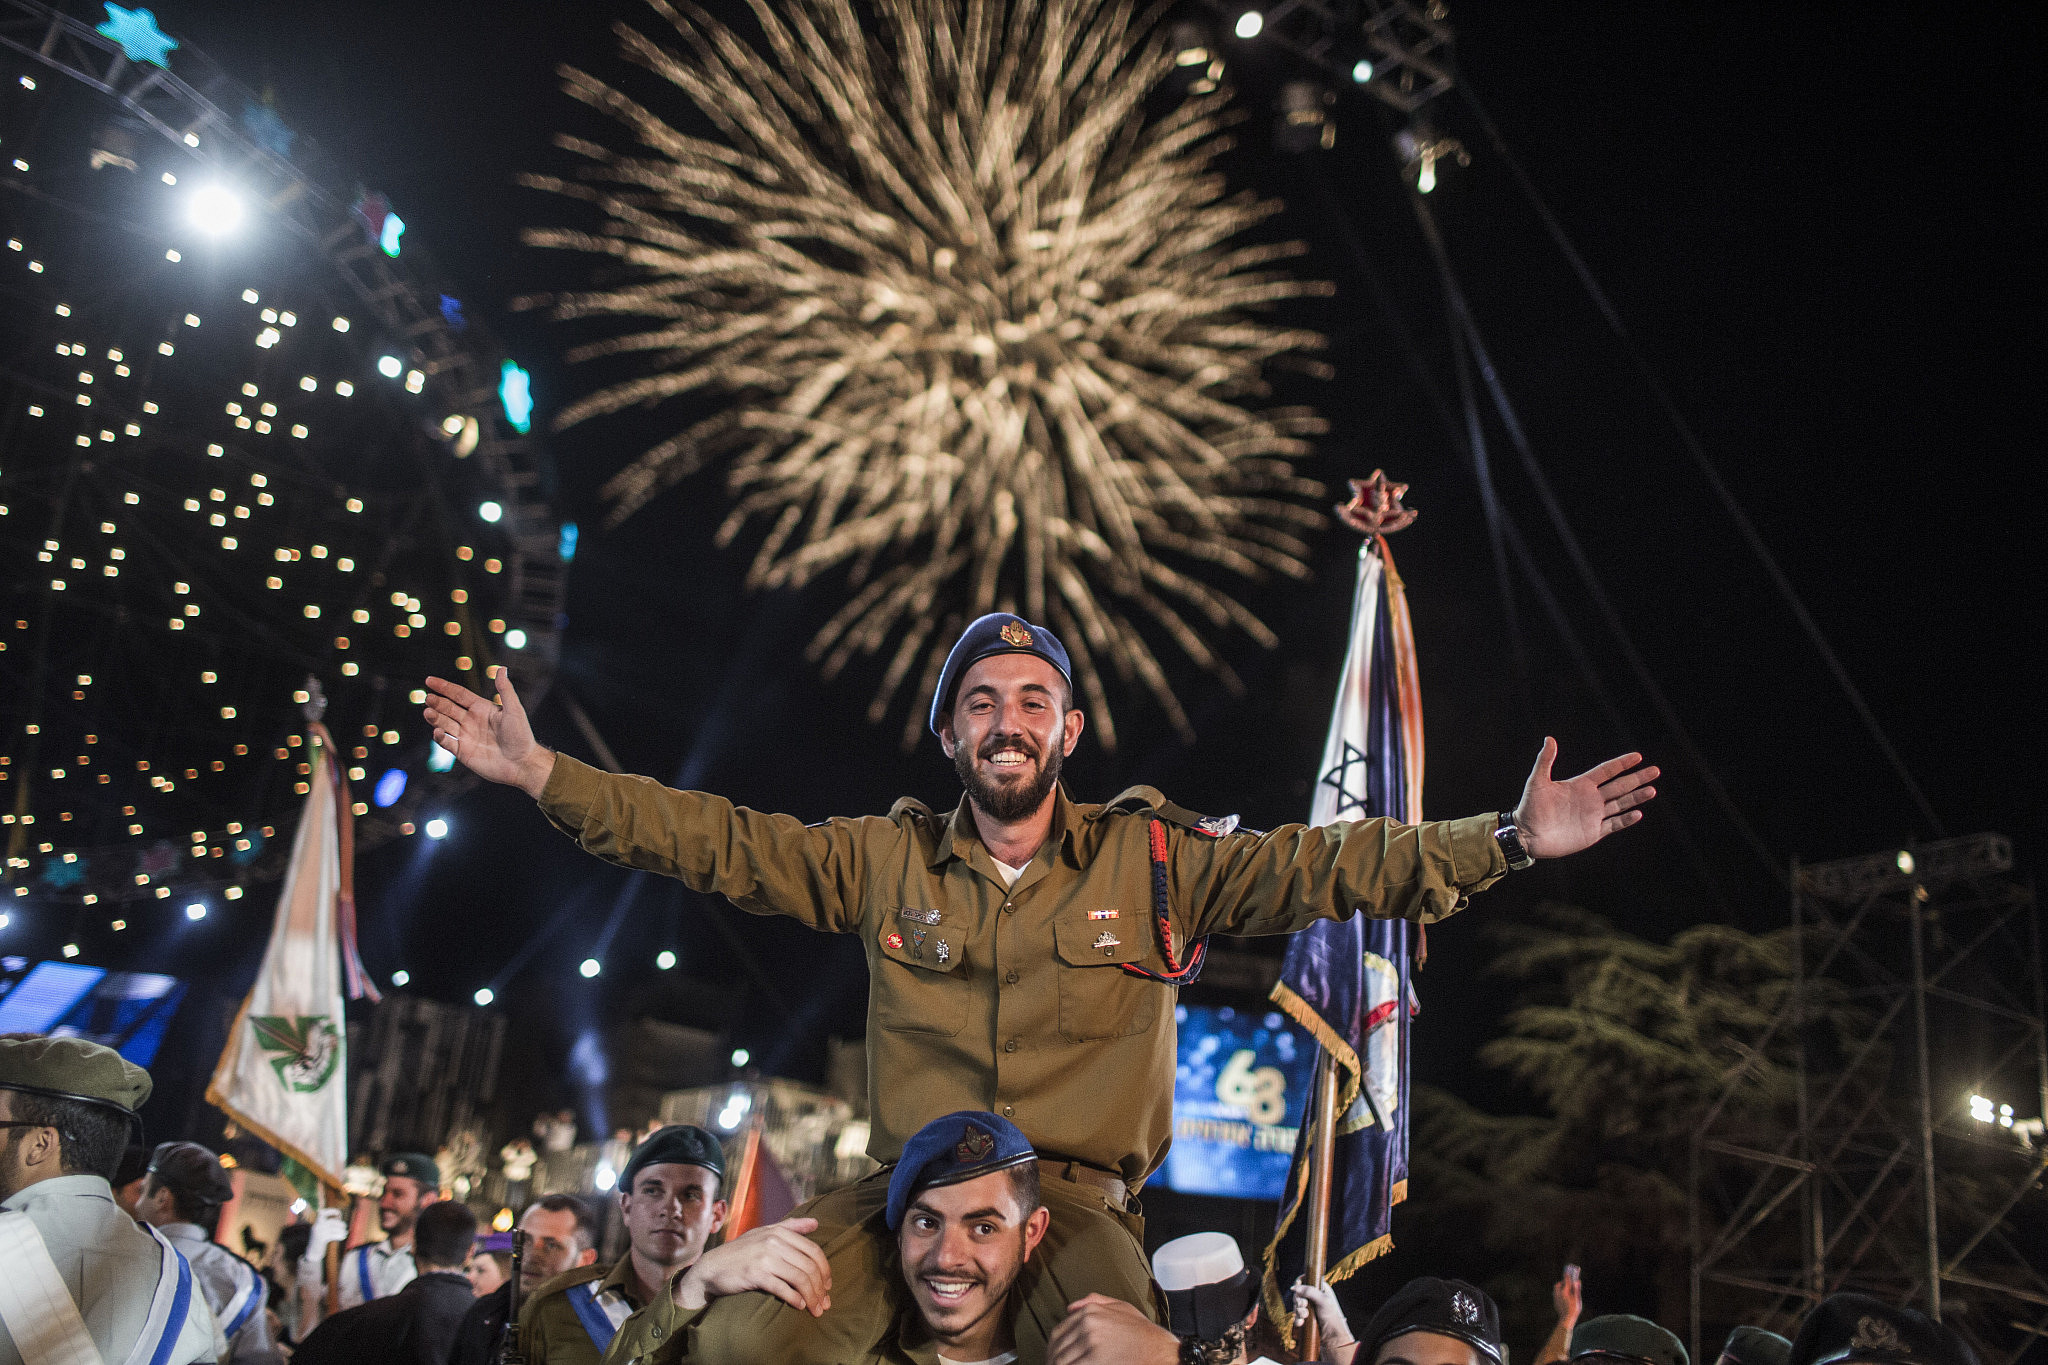 Israeli soldiers celebrate during the official state ceremony of Israel's 68th Independence Day at Mount Herzl, Jerusalem, on May 11, 2016. (Hadas Parush/Flash90)